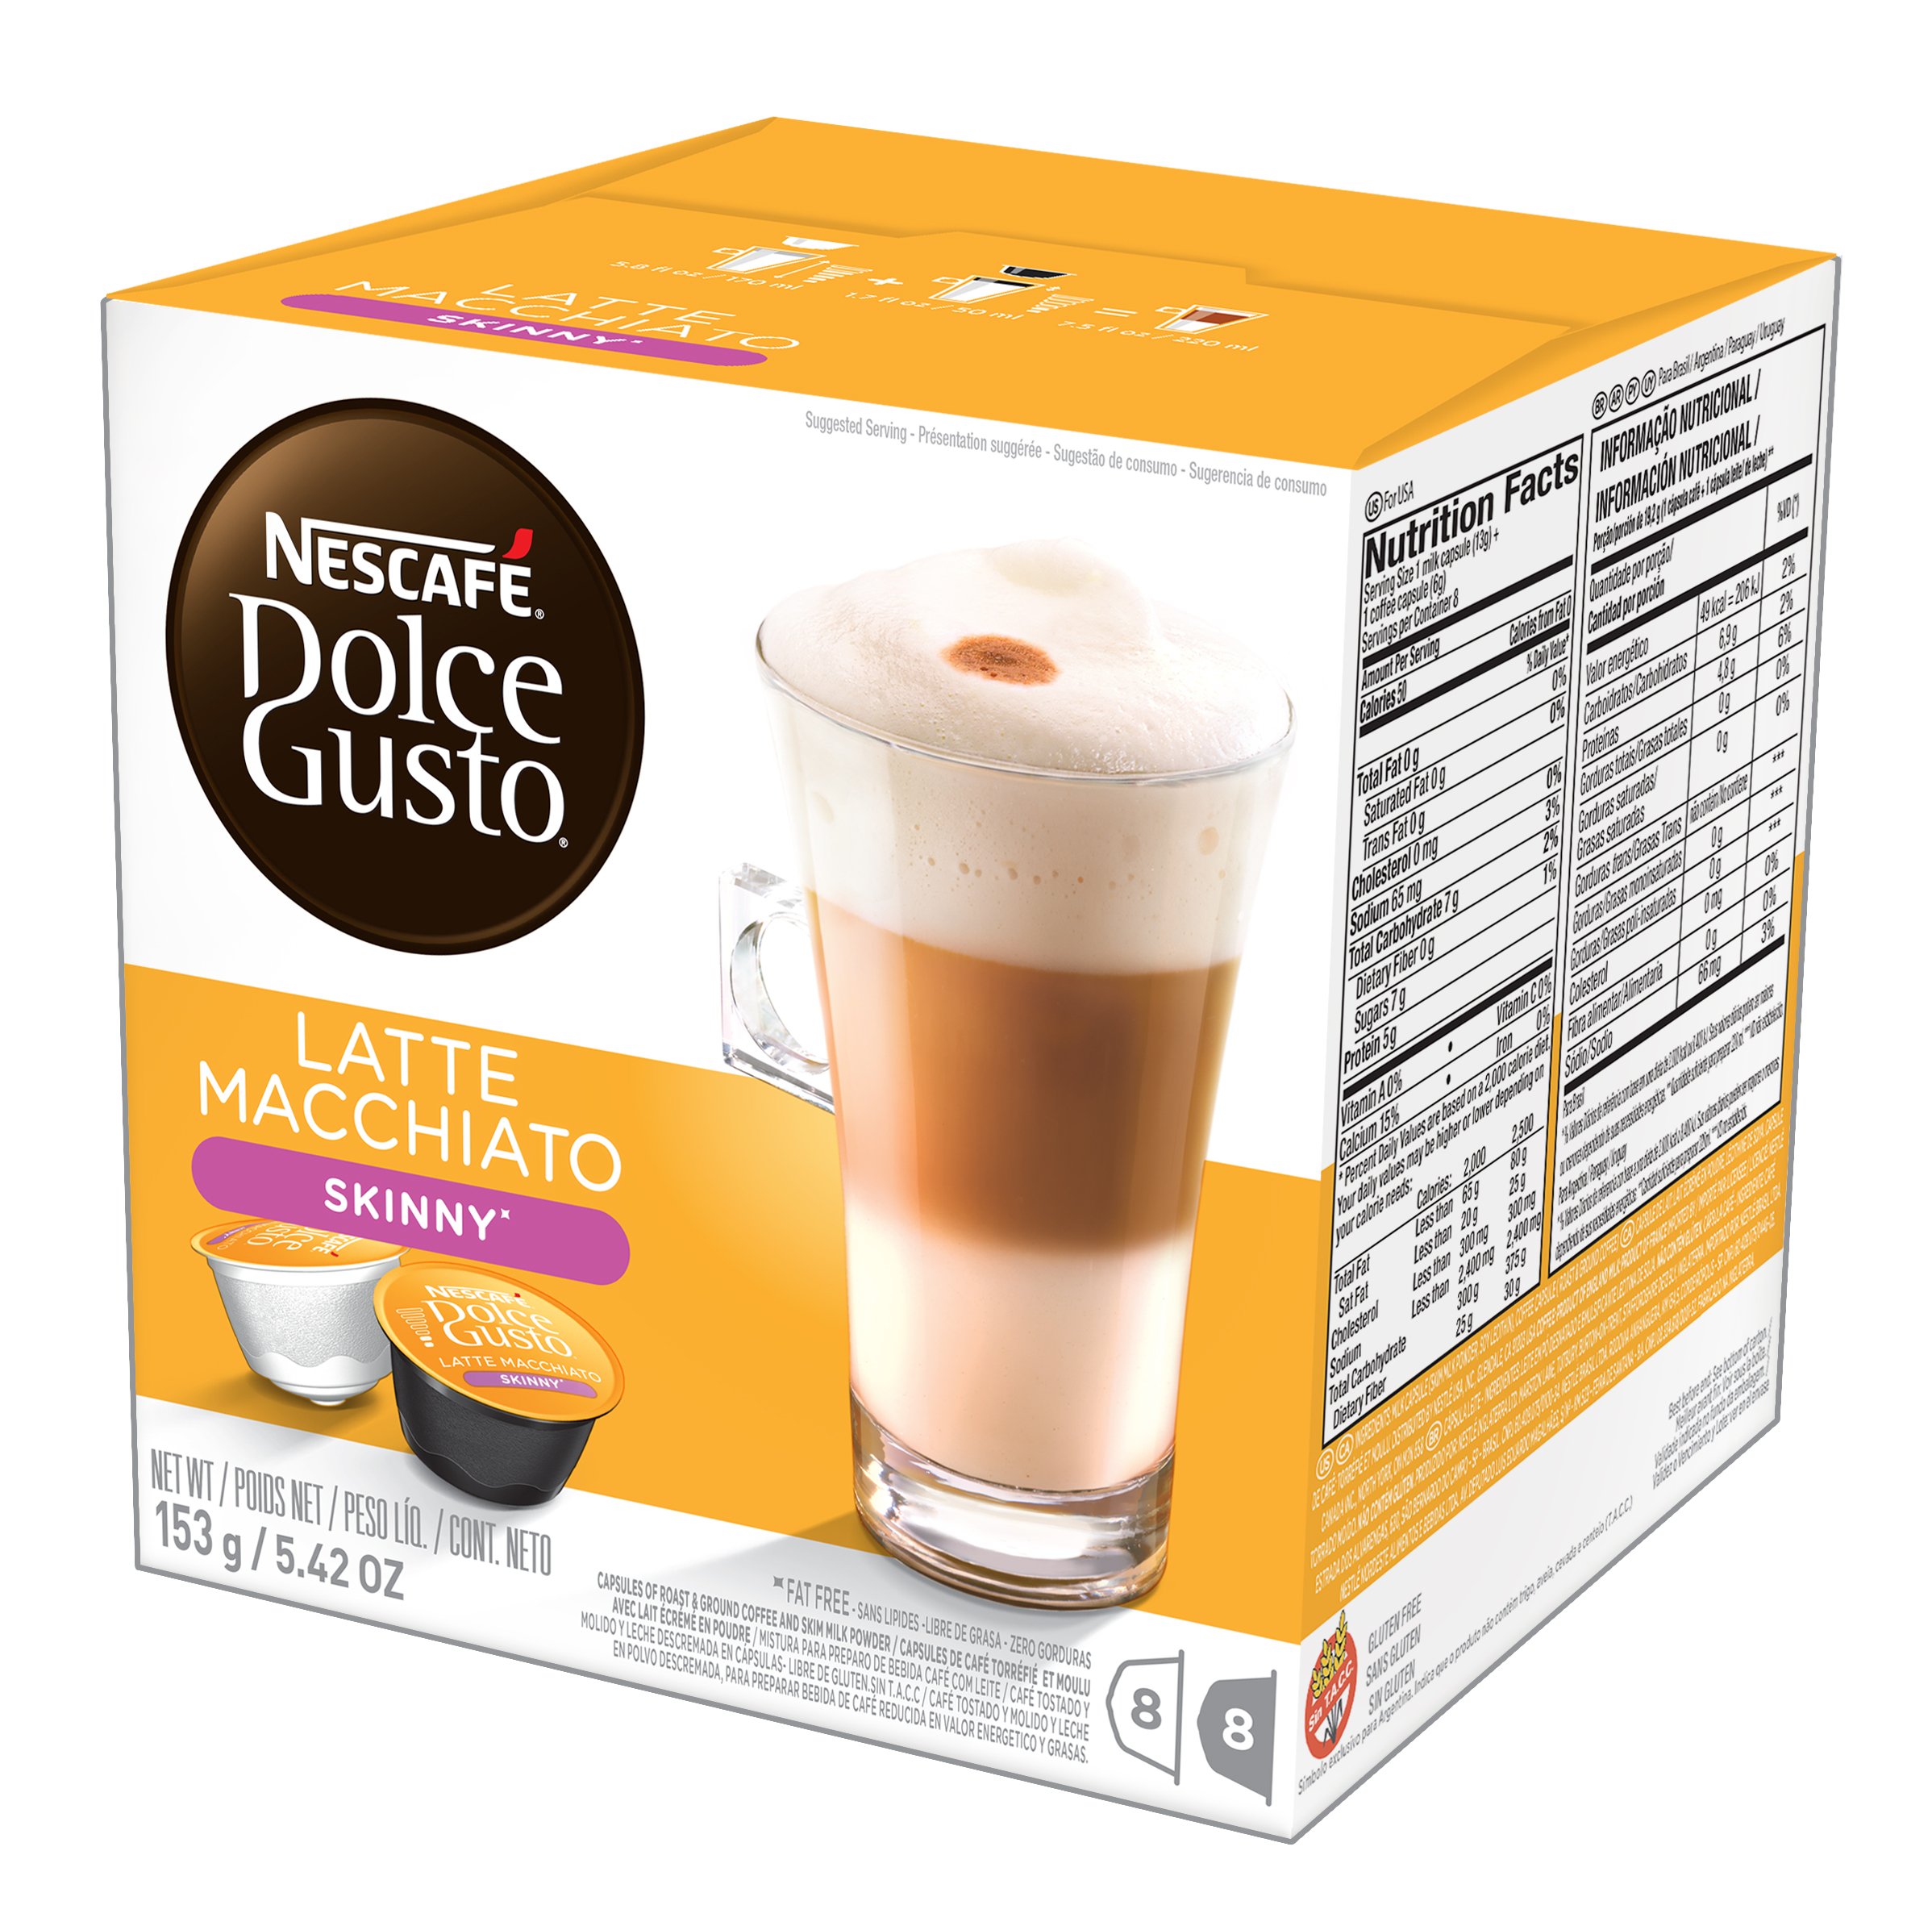 nescafe dolce gusto cappuccino instructions